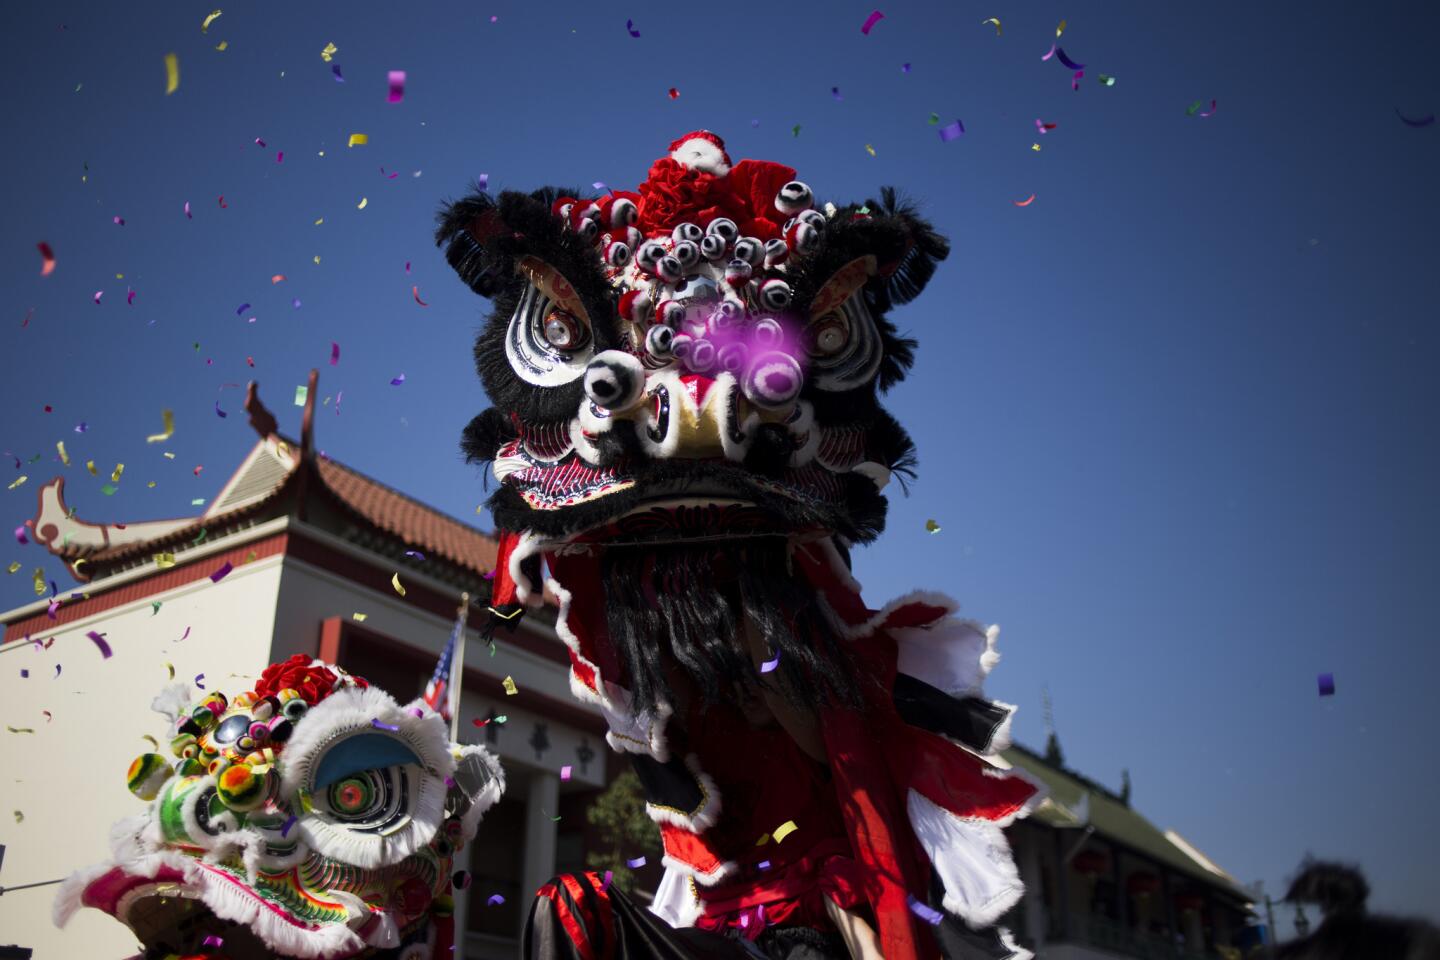 A multicolored dragon dances its way through Chinatown.